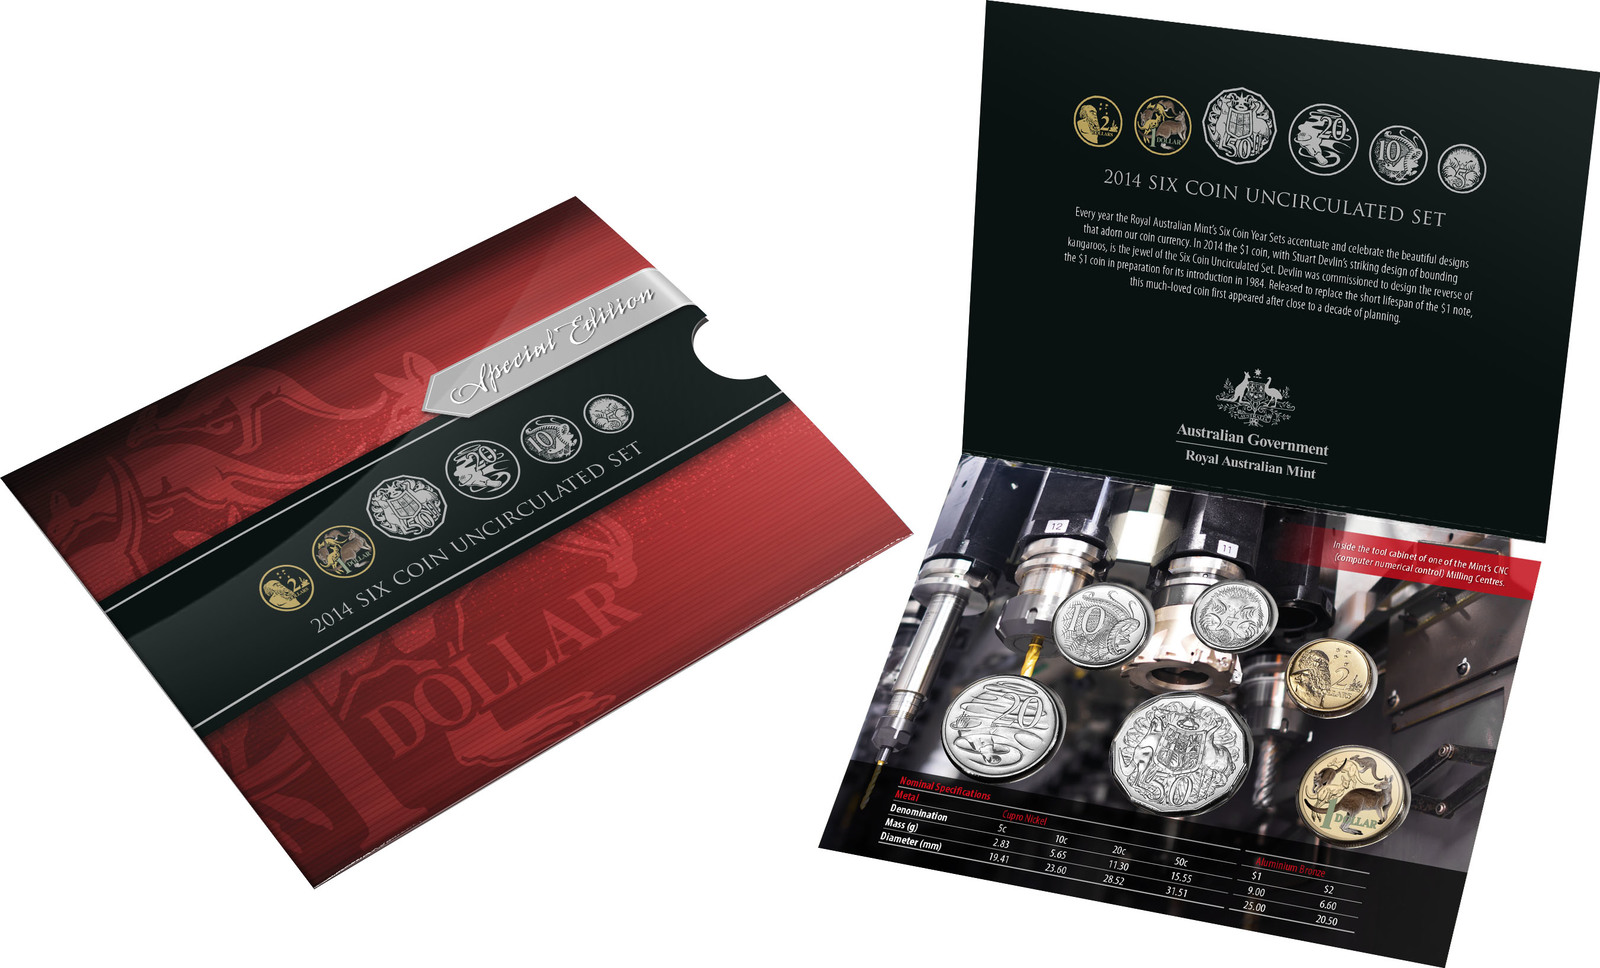 Australia 2014 Uncirculated Mint Coin Set - Special Edition product image